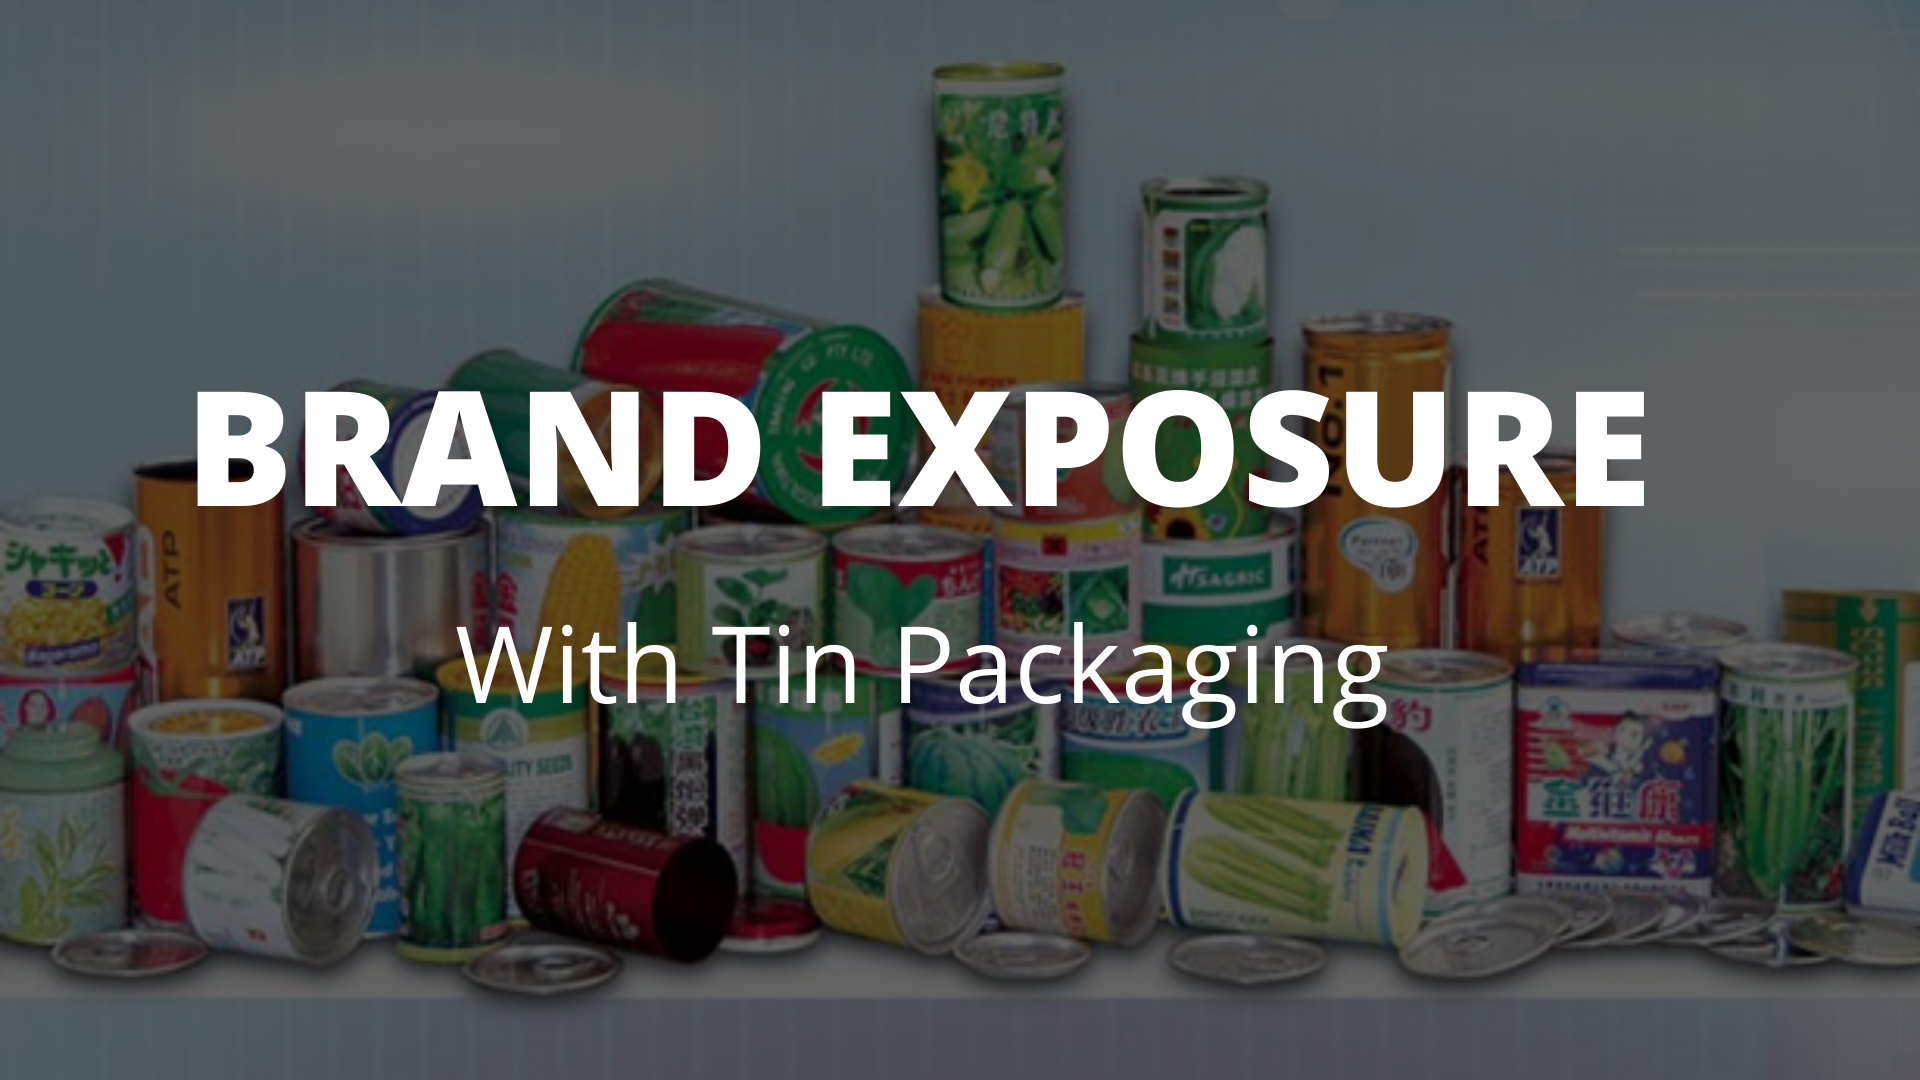 Brand Exposure With Tin Packaging